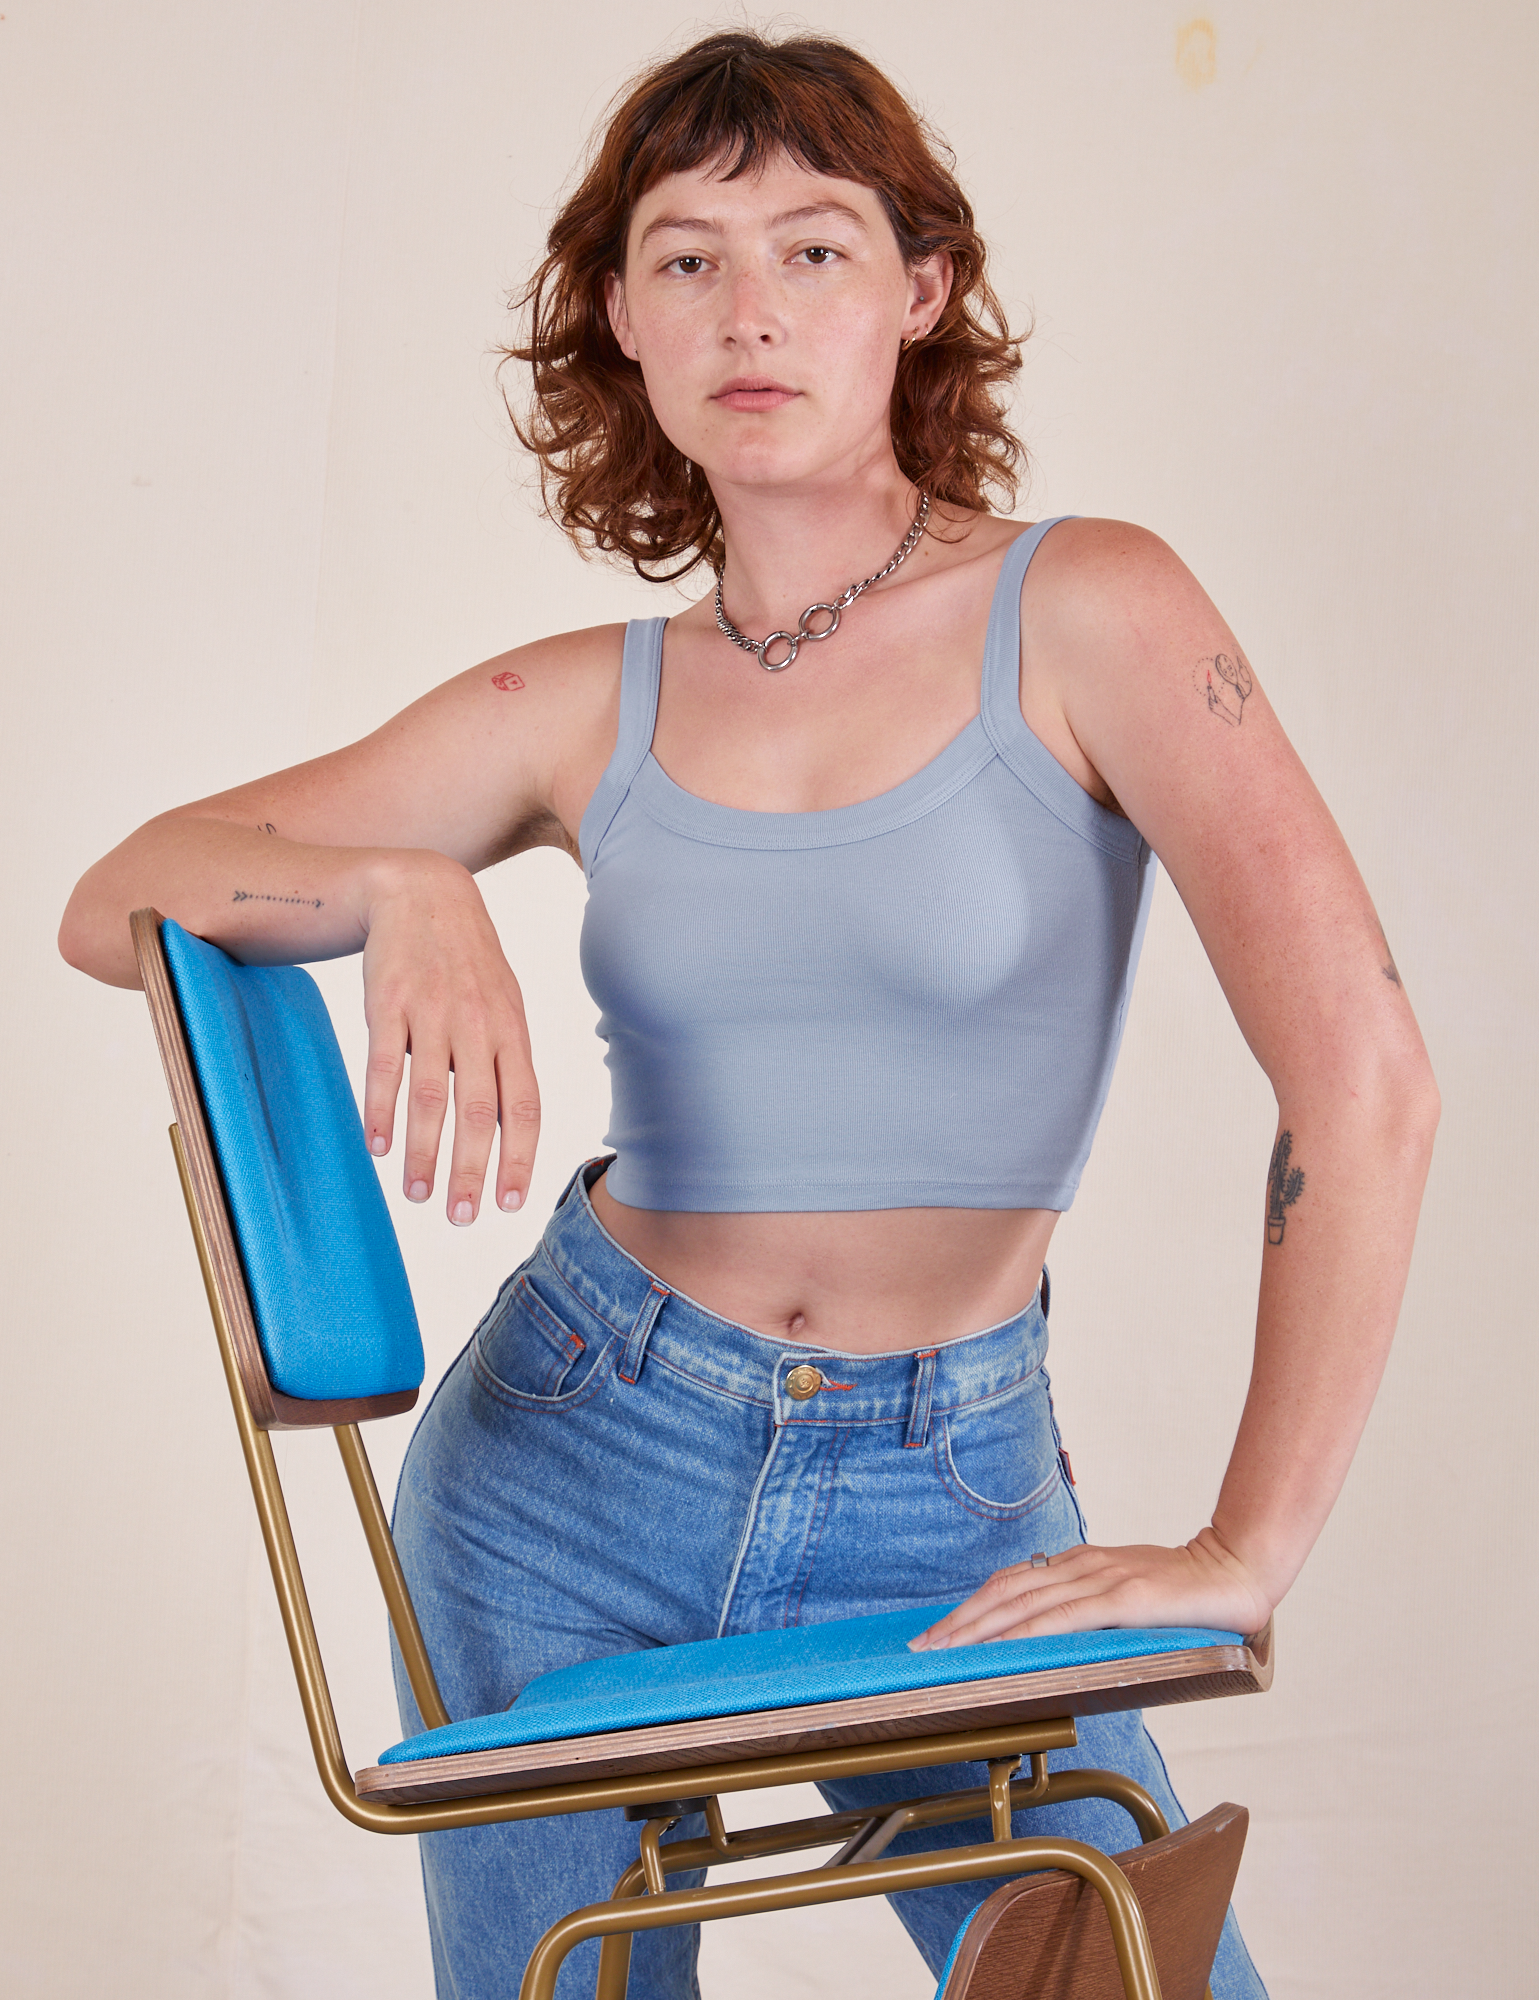 Alex is 5&#39;8&quot; and wearing P Cropped Cami in Periwinkle. There are two blue and brass vintage chairs stacked on top of each other. Alex has her elbow on the top back of one chair and the other hand on the seat.